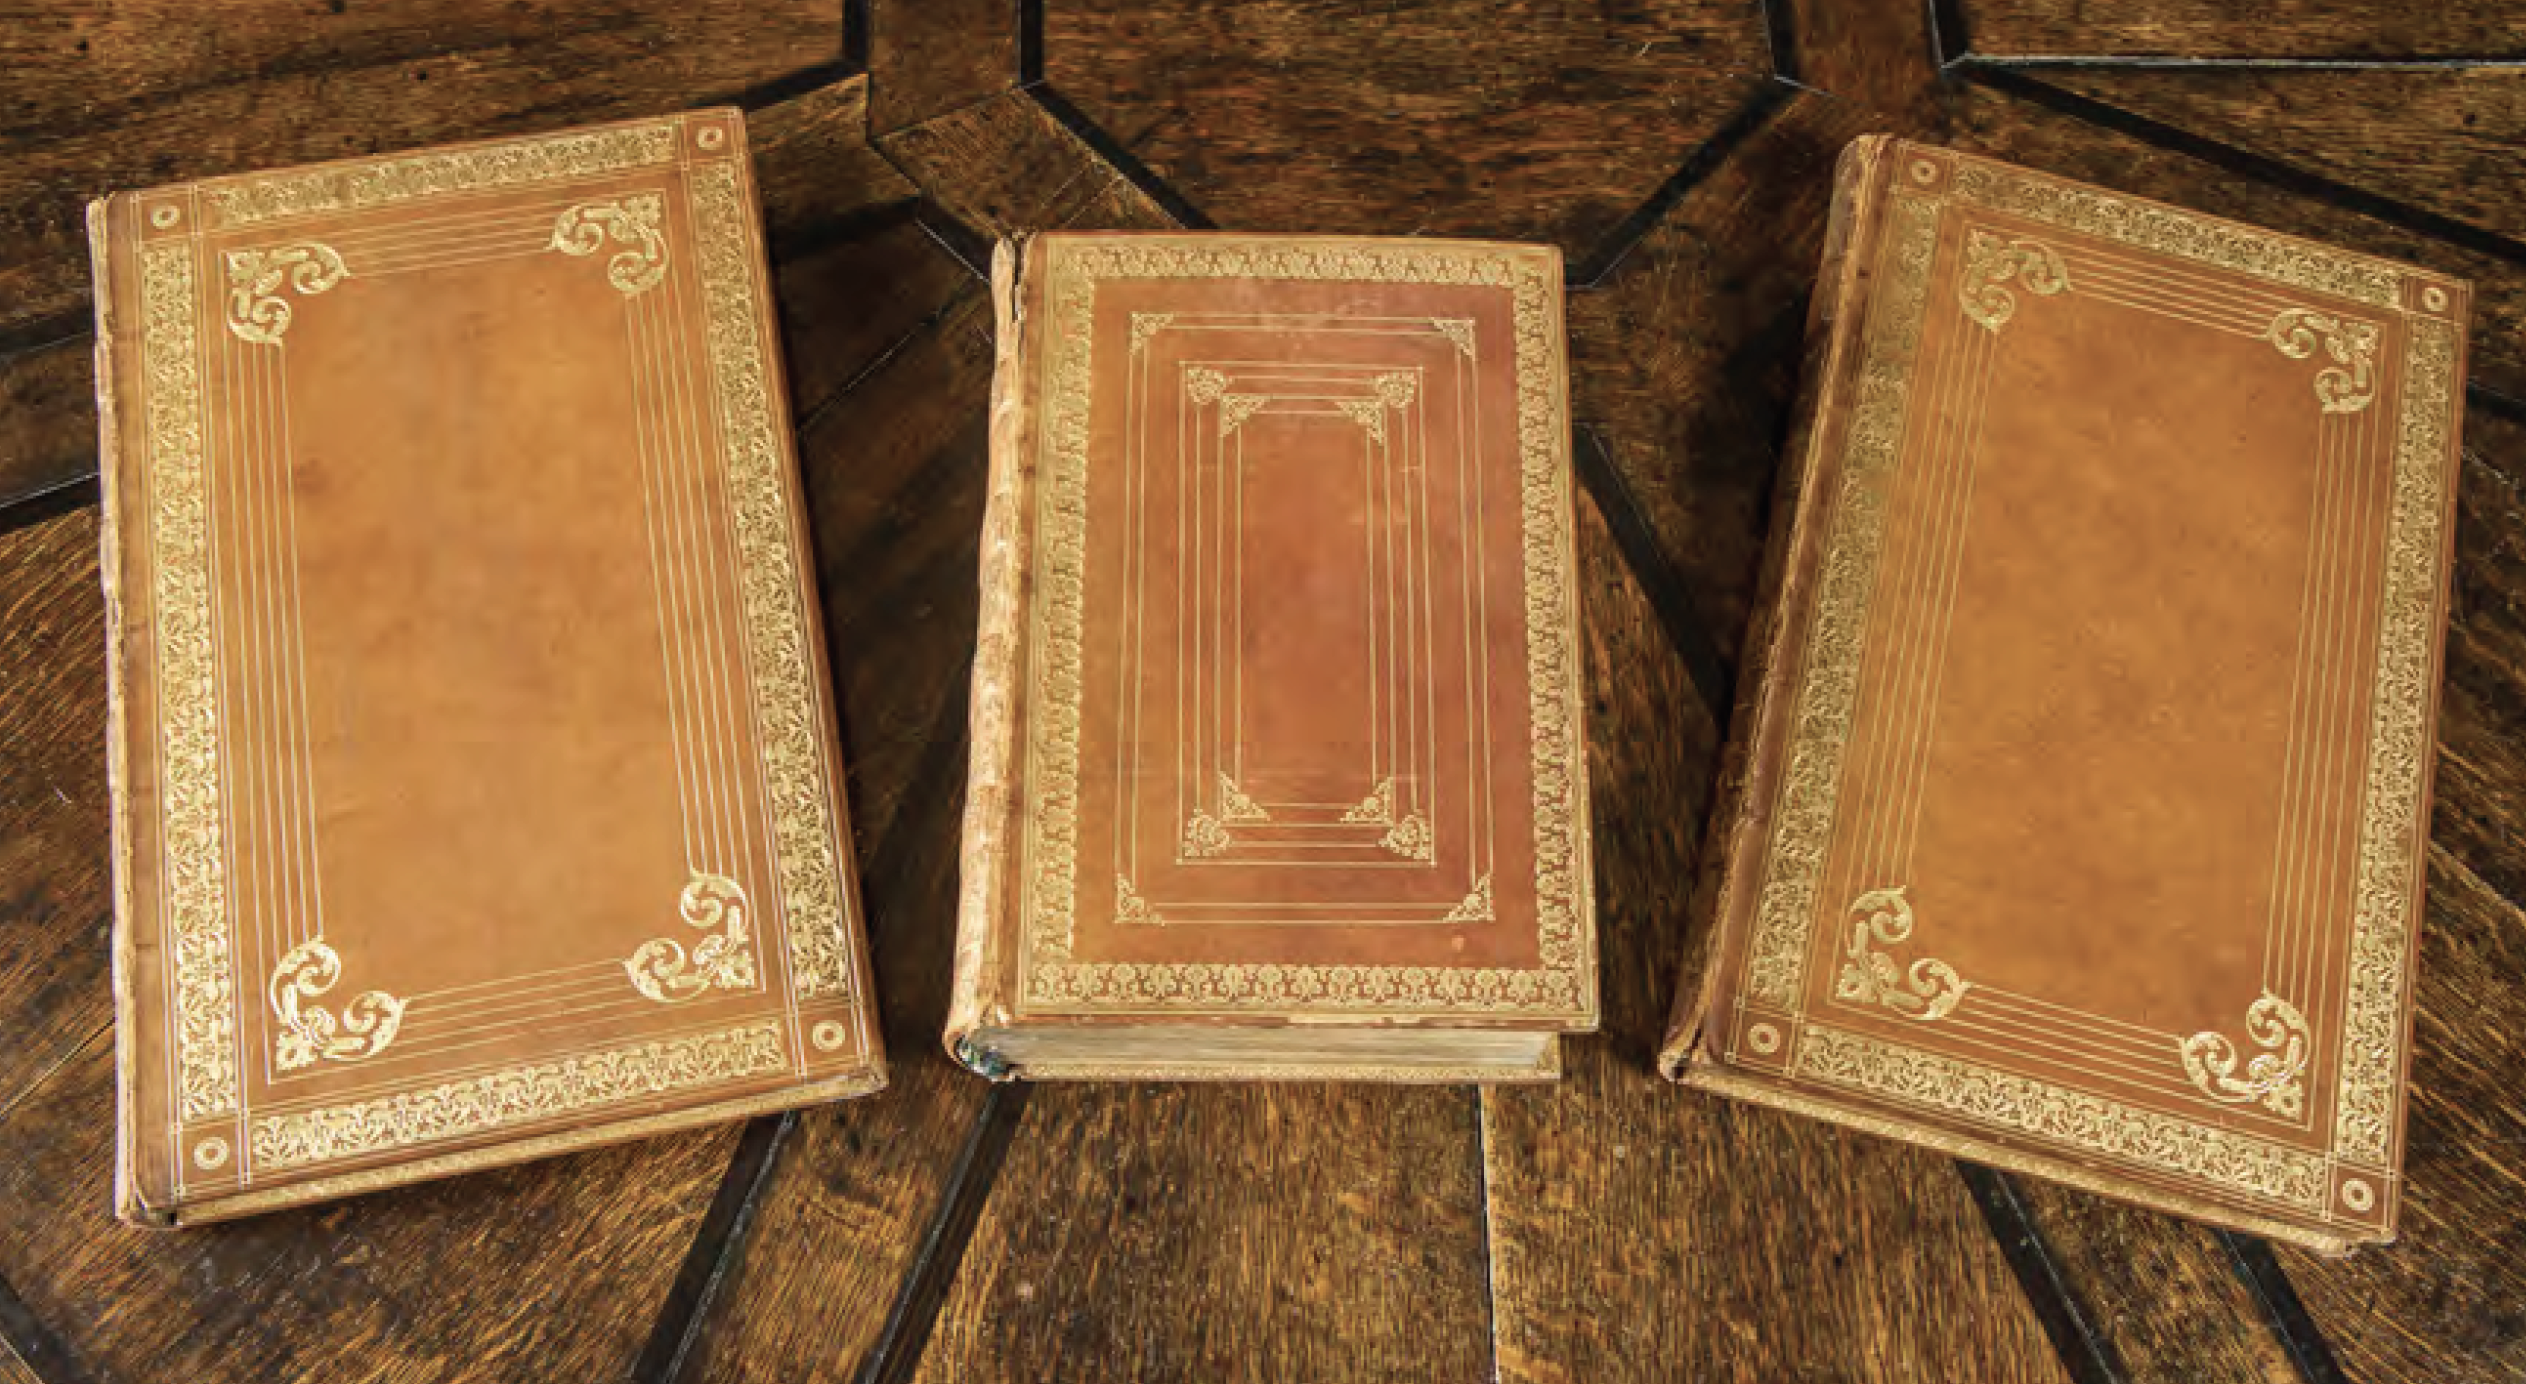 19th-century bindings: Greek poets (left and right) and New Testament (centre), ©National Trust Images/Paul Bailey